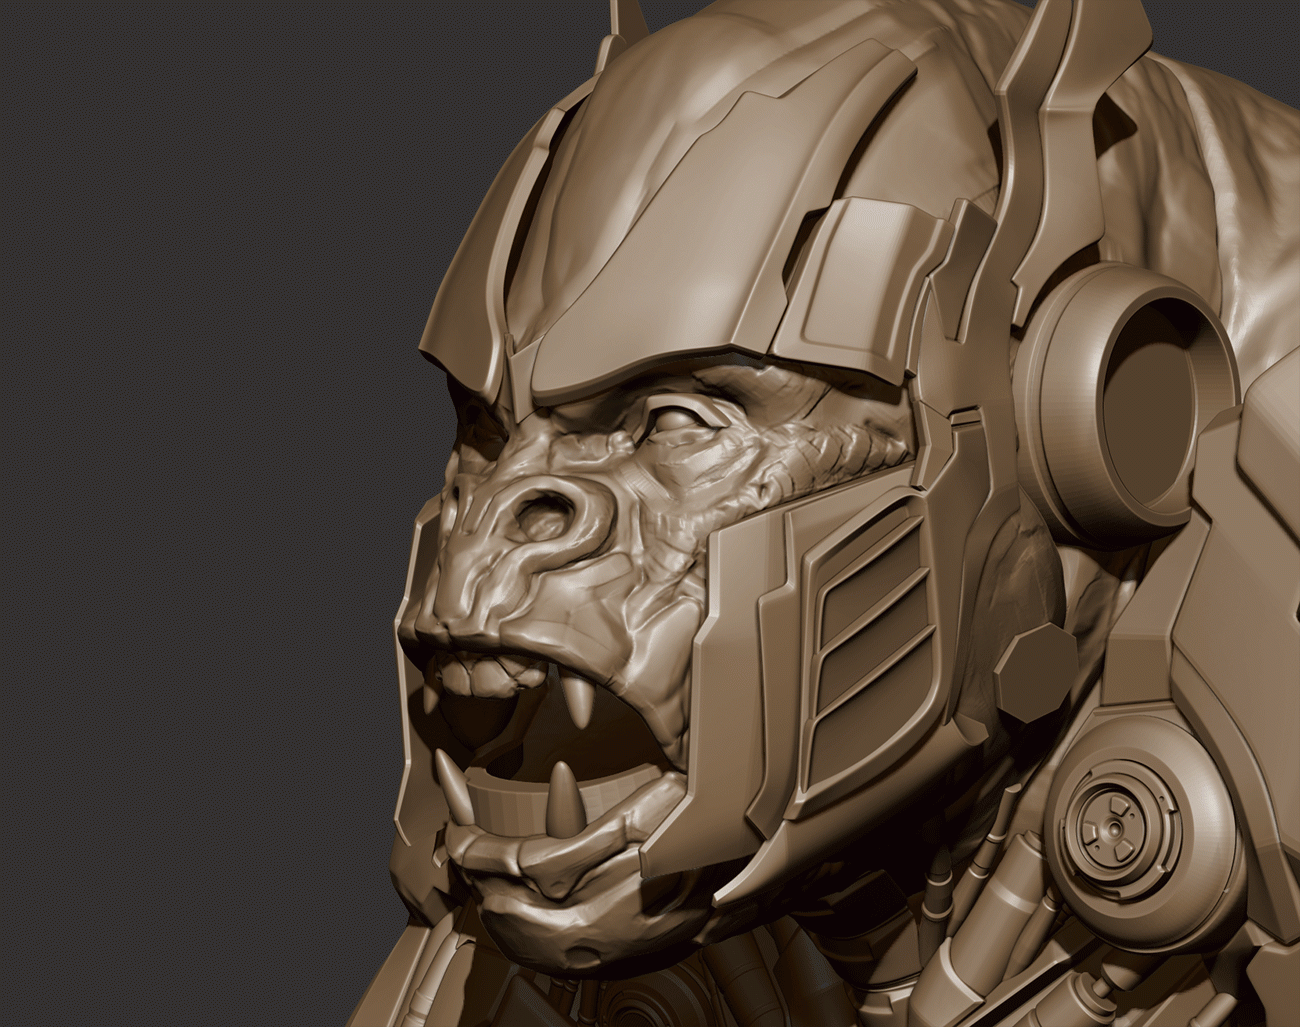 In-progress image of Optimus Primal 3D sculpt by AET professor Isaac Oster